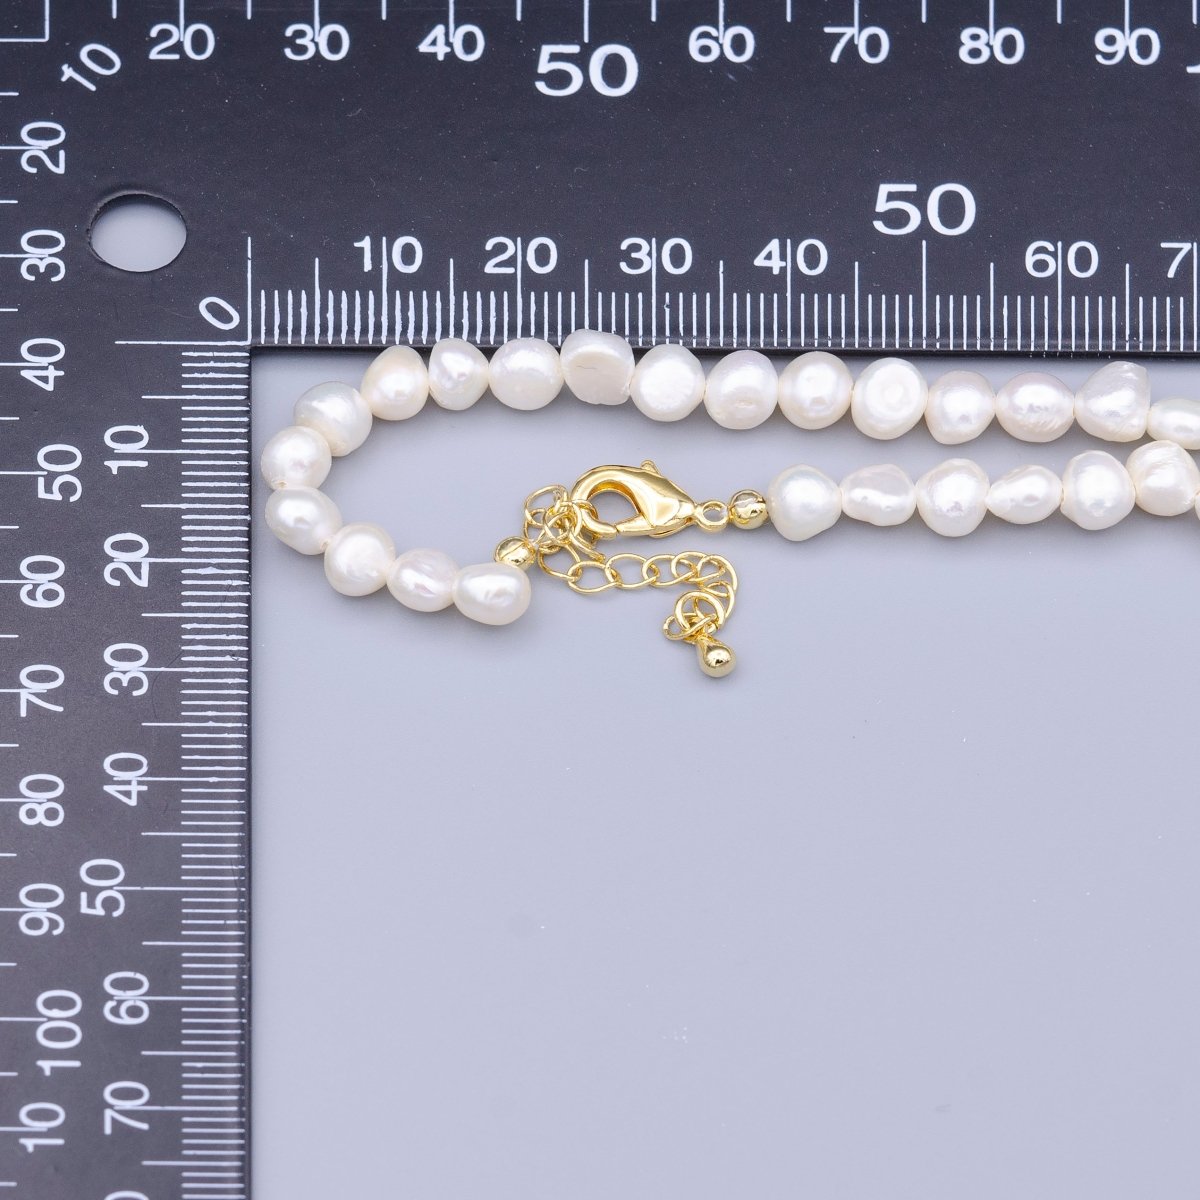 OS 6.4mm Round White Freshwater Pearl 14 Inch Choker Necklace | WA-1498 Clearance Pricing - DLUXCA